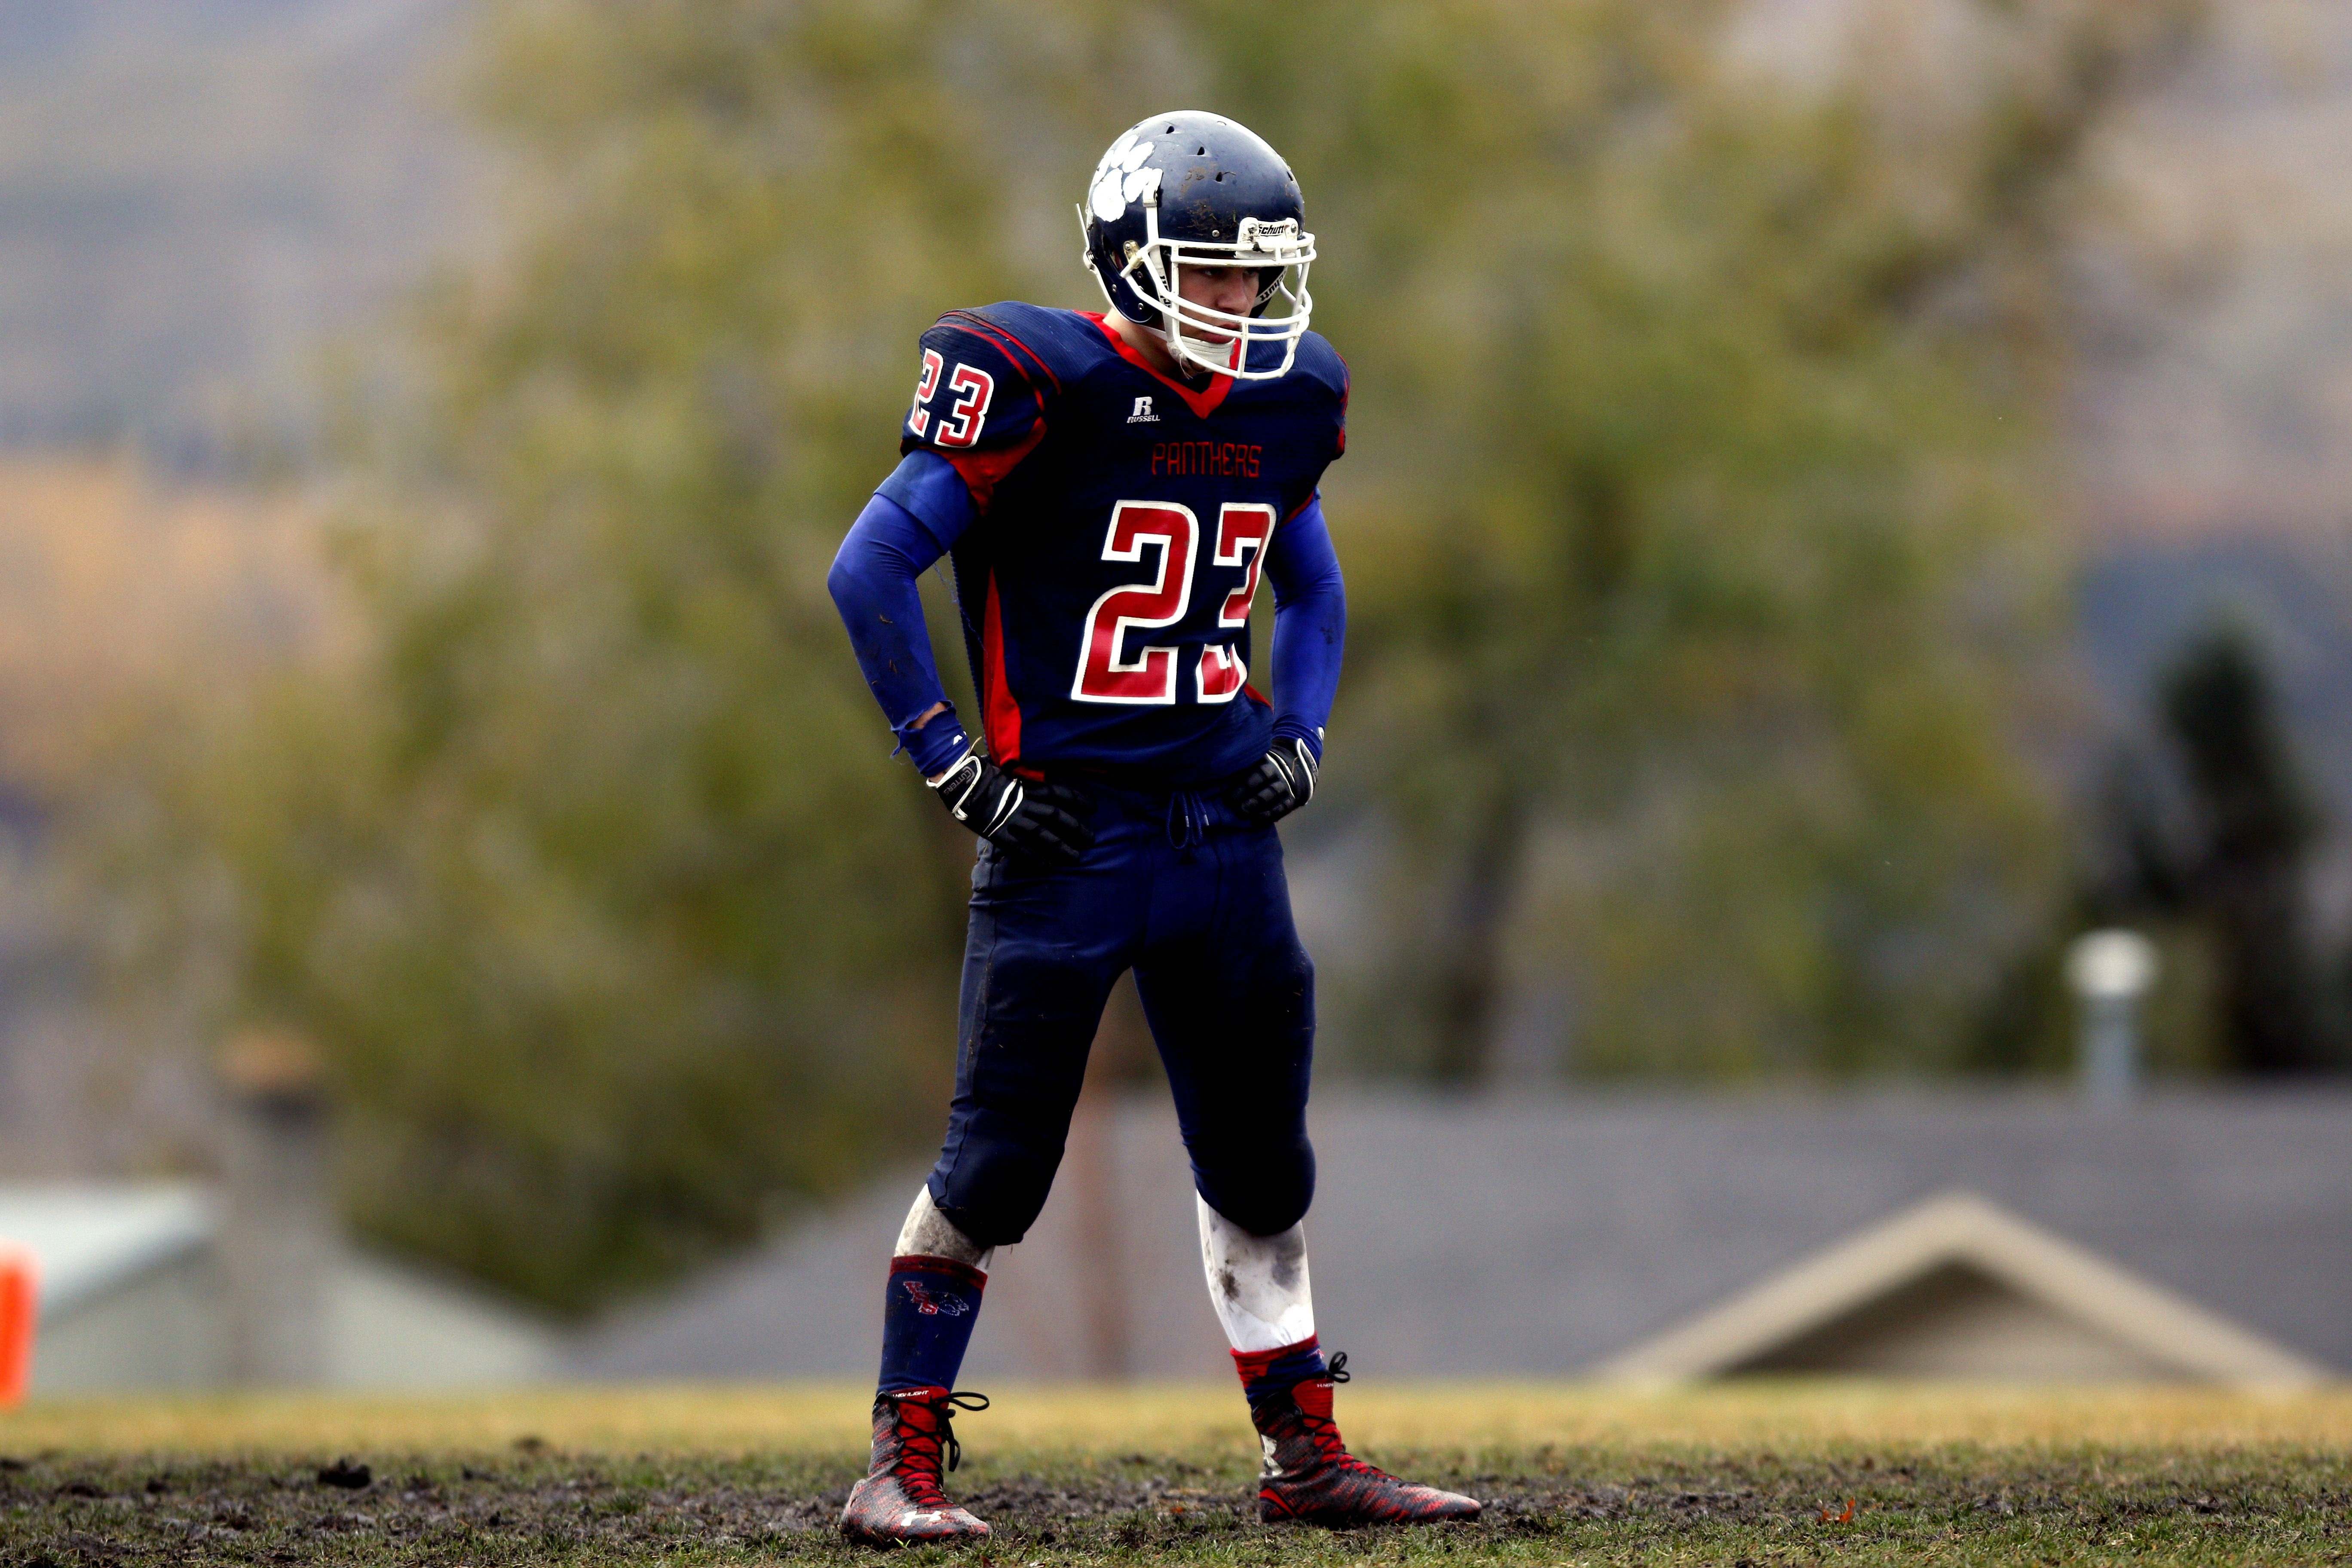 men's blue and red american football uniform